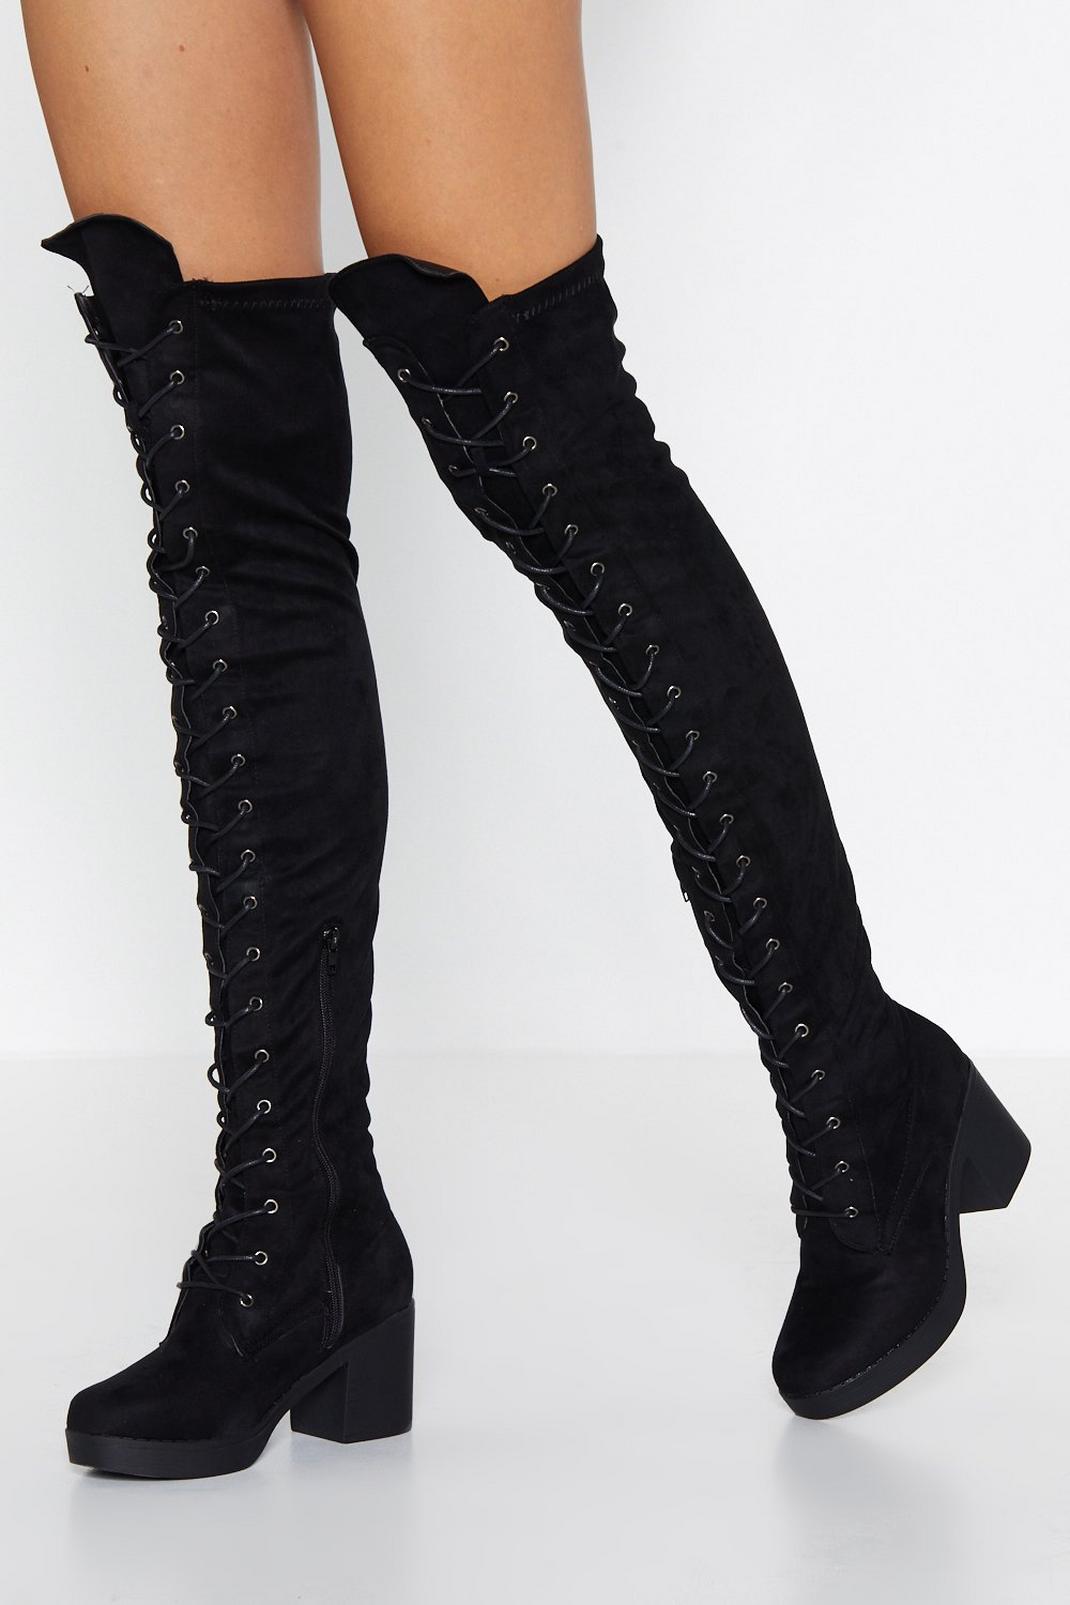 Black Lace Up Over the Knee Boots image number 1